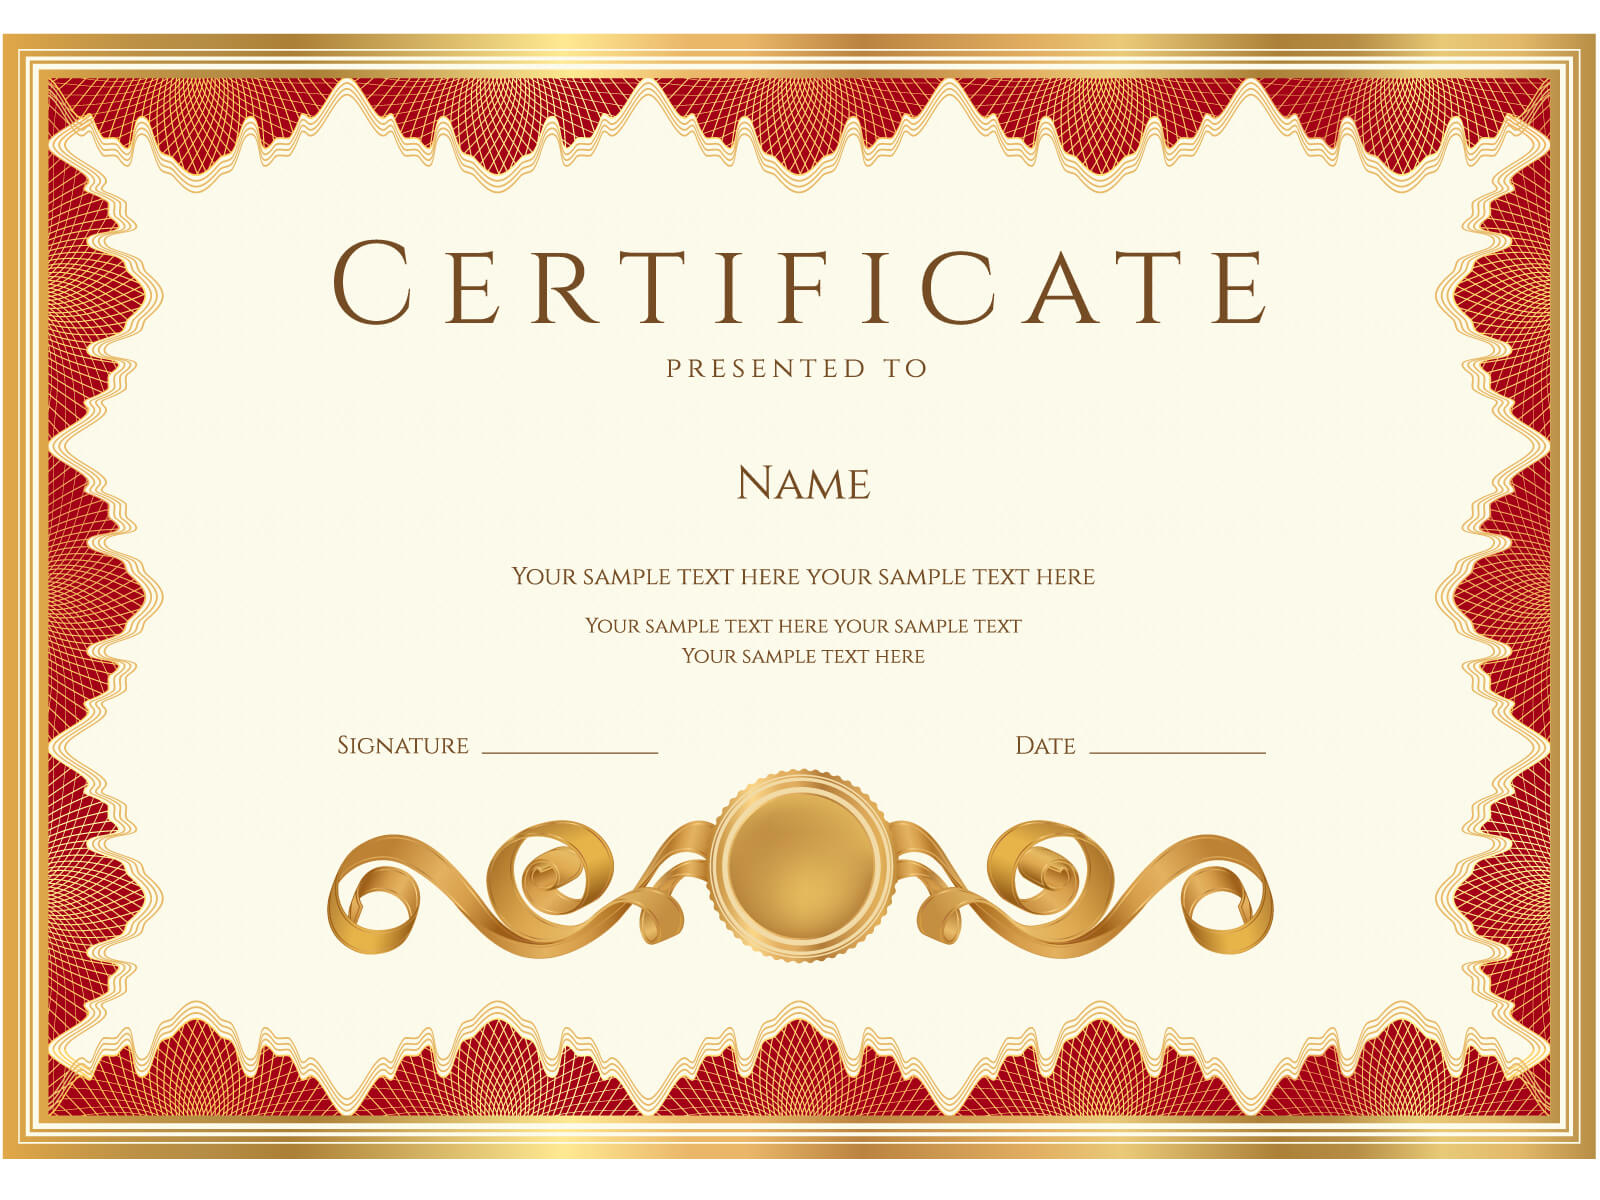 Powerpoint Certificate Templates. Free Diploma Certificate With Regard To Powerpoint Certificate Templates Free Download